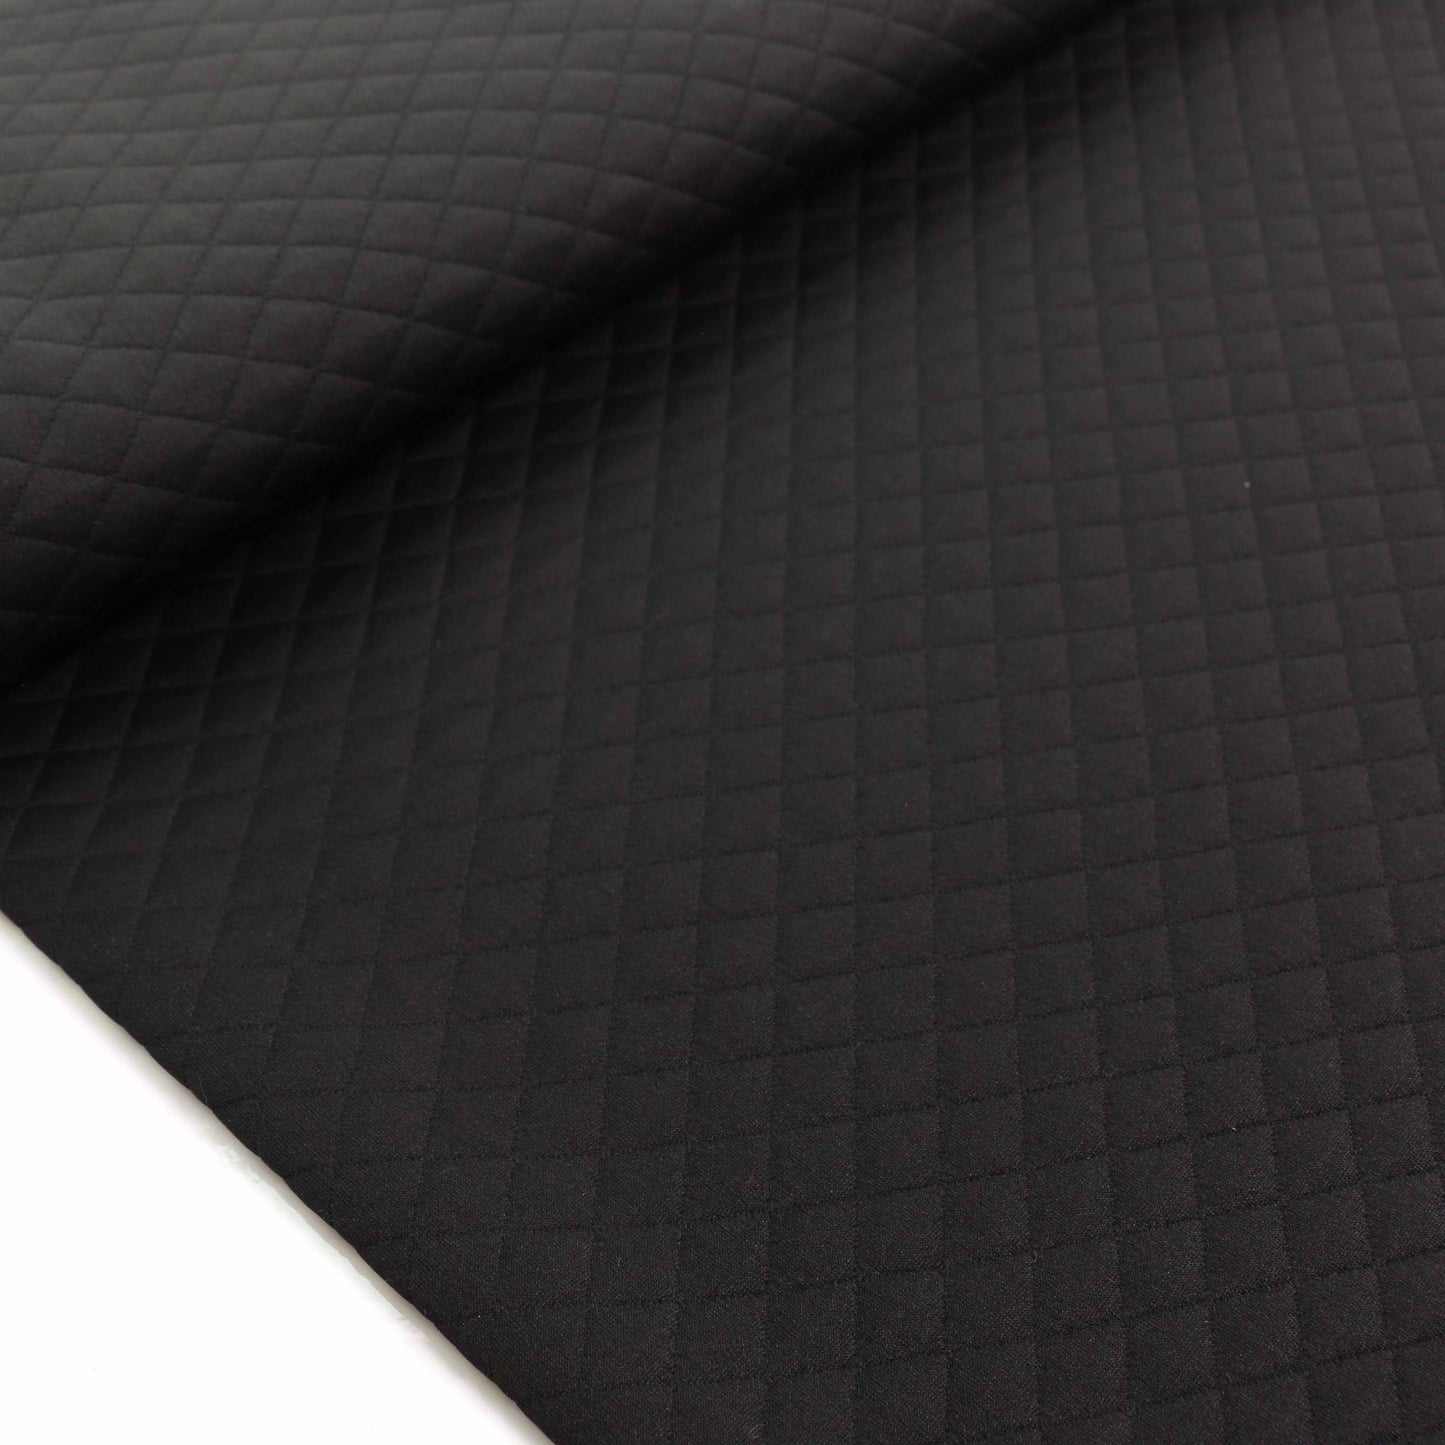 Quilted Jersey Fabric - Black diamond